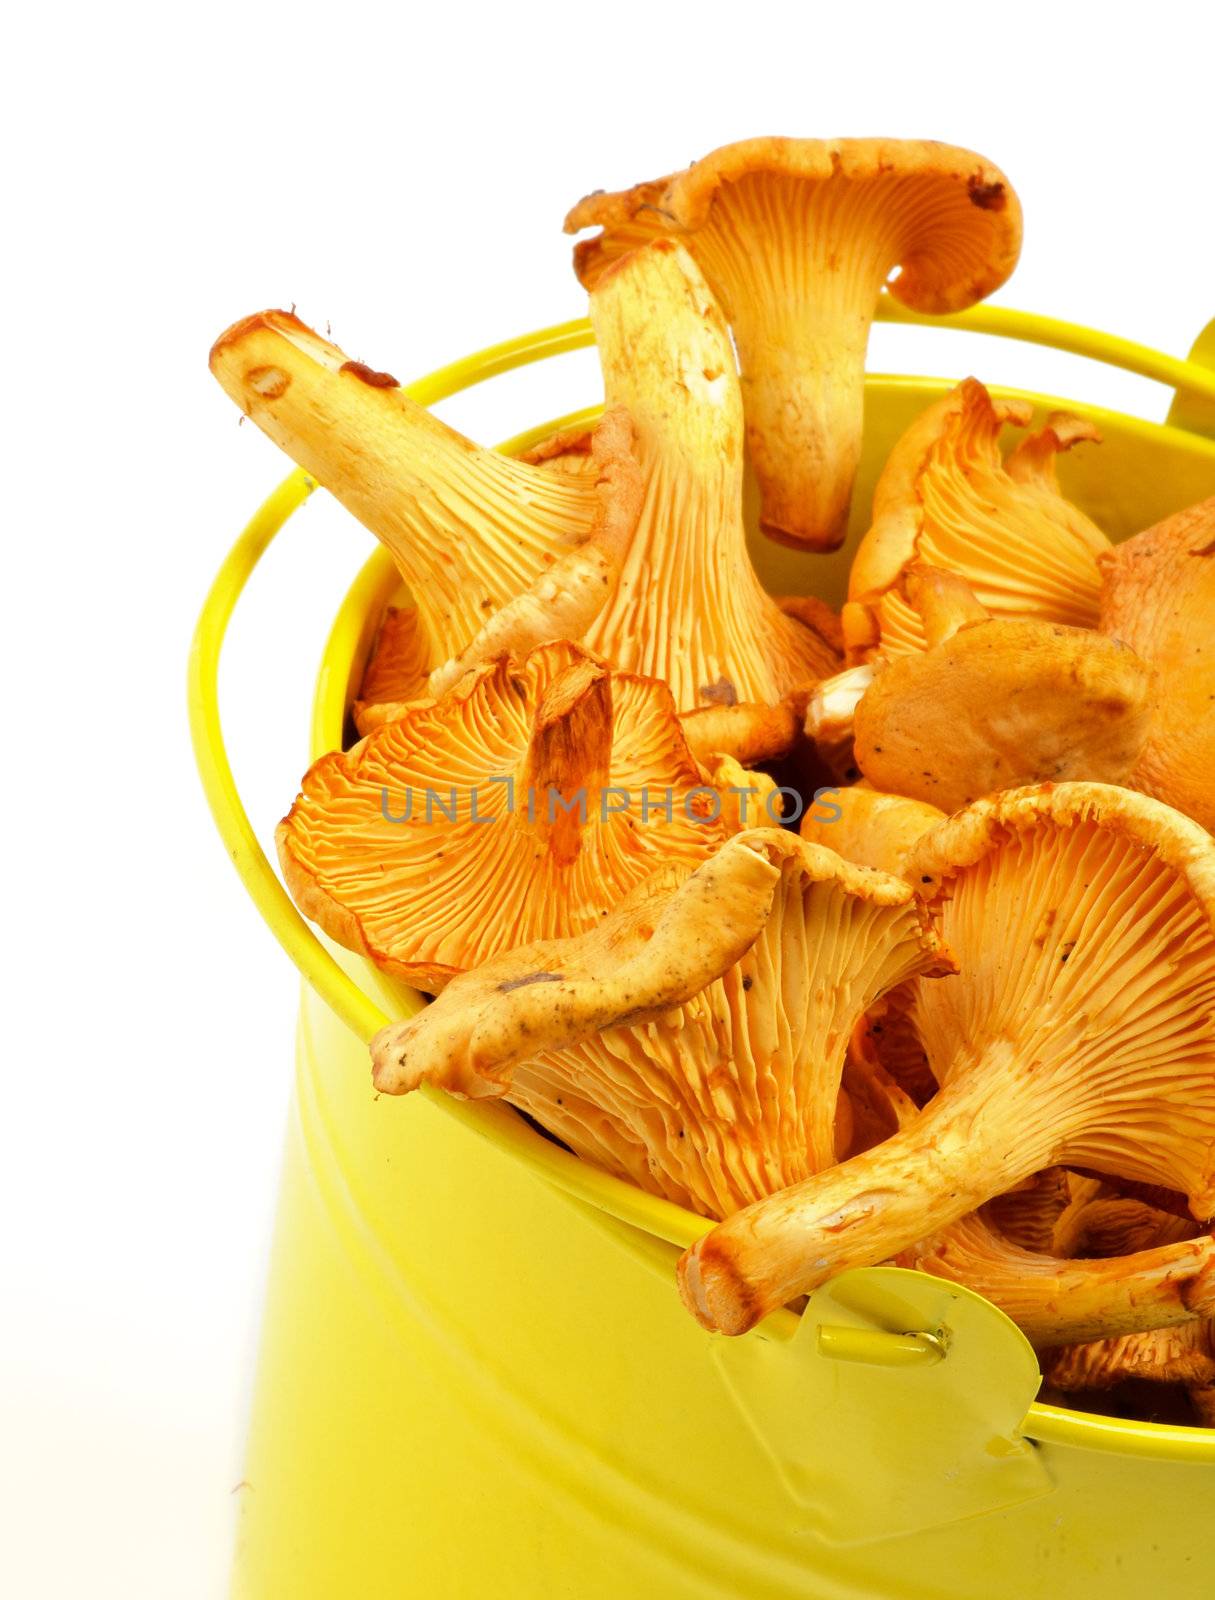 Perfect Raw Chanterelles in Yellow Tin Bucket closeup isolated on white background